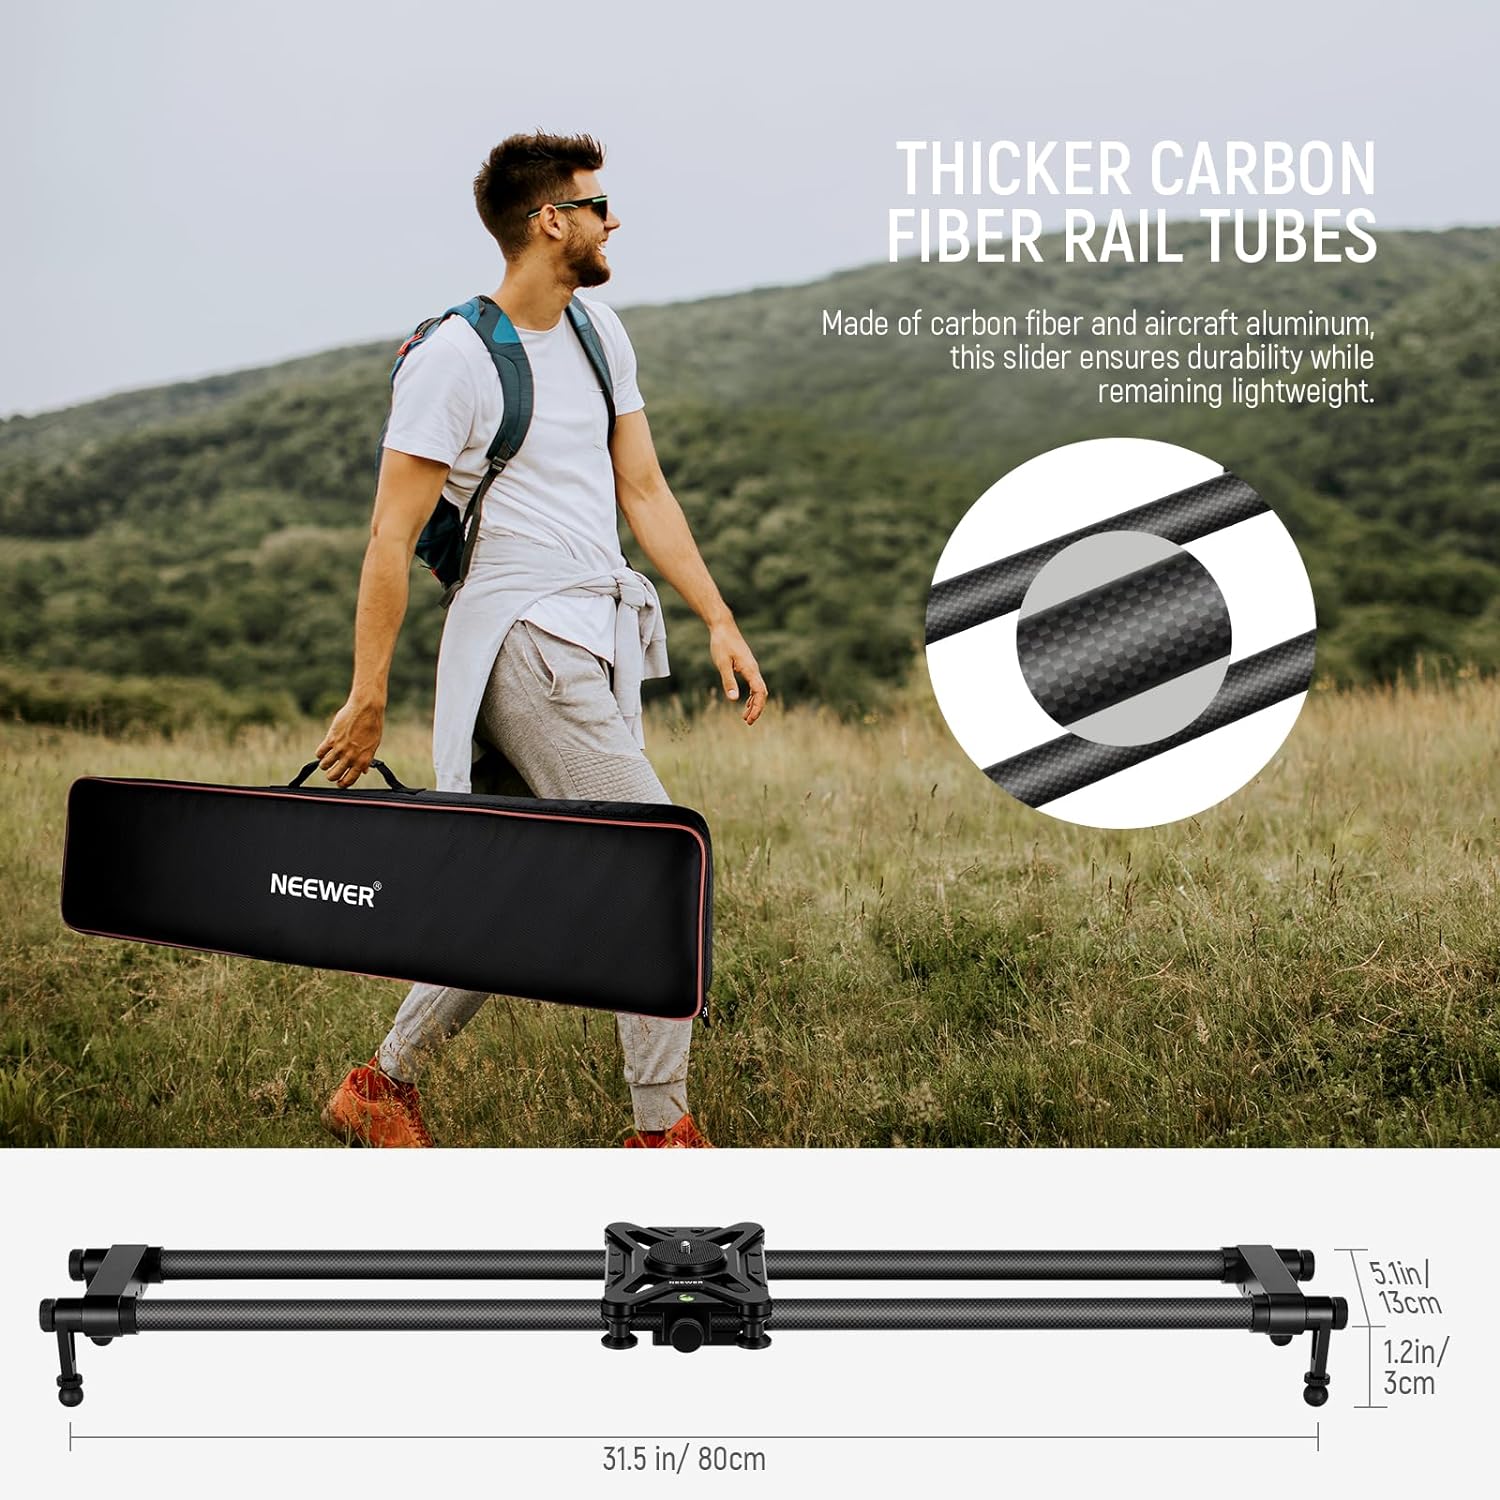 NEEWER 31.5in/80cm Carbon Fiber Camera Slider, Dolly Rail Track with Thicker Tube & More Stable Support, 4 Precise Smooth Bearings and Leveler for DSLR Camera Camcorder, Max Load 17.6lb/8kg, CS80CM